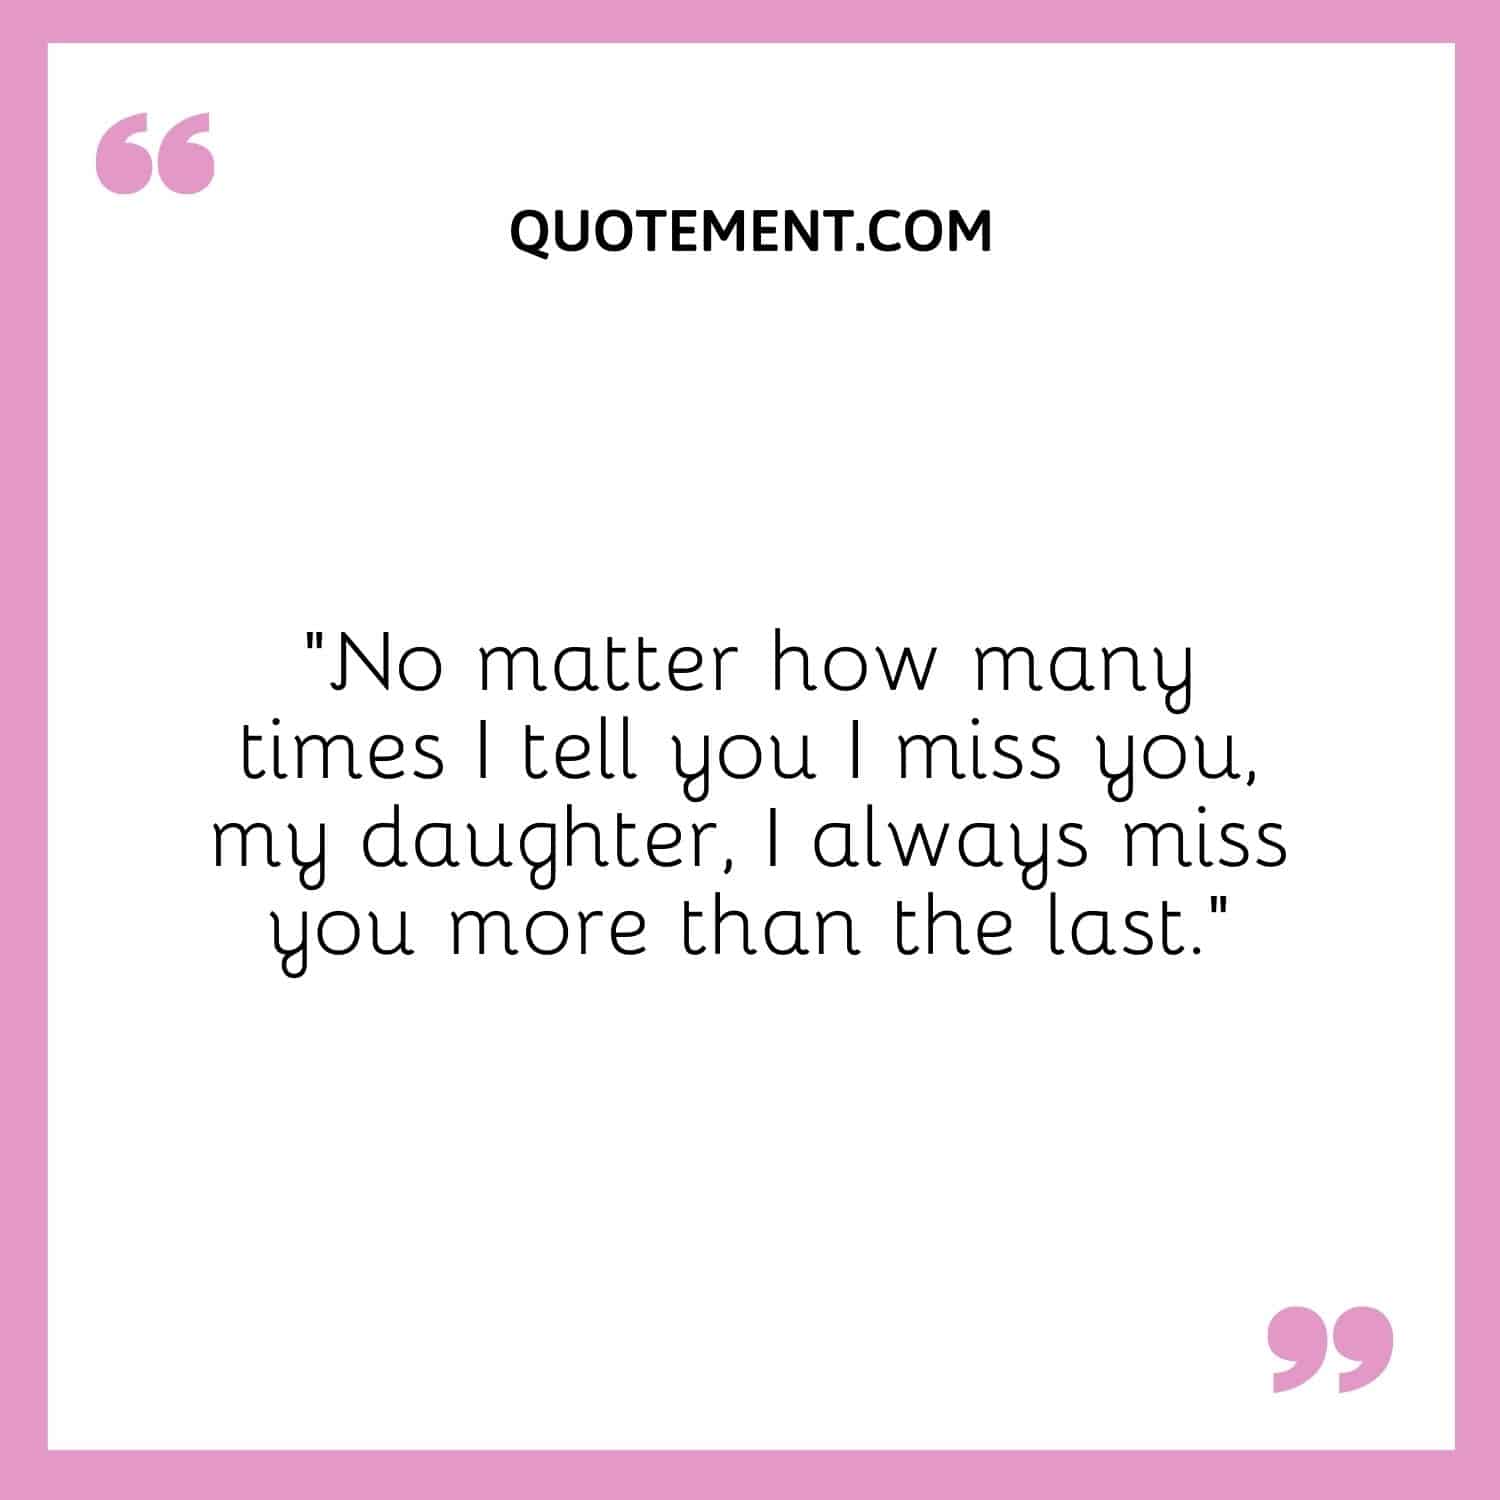 I always miss you more than the last